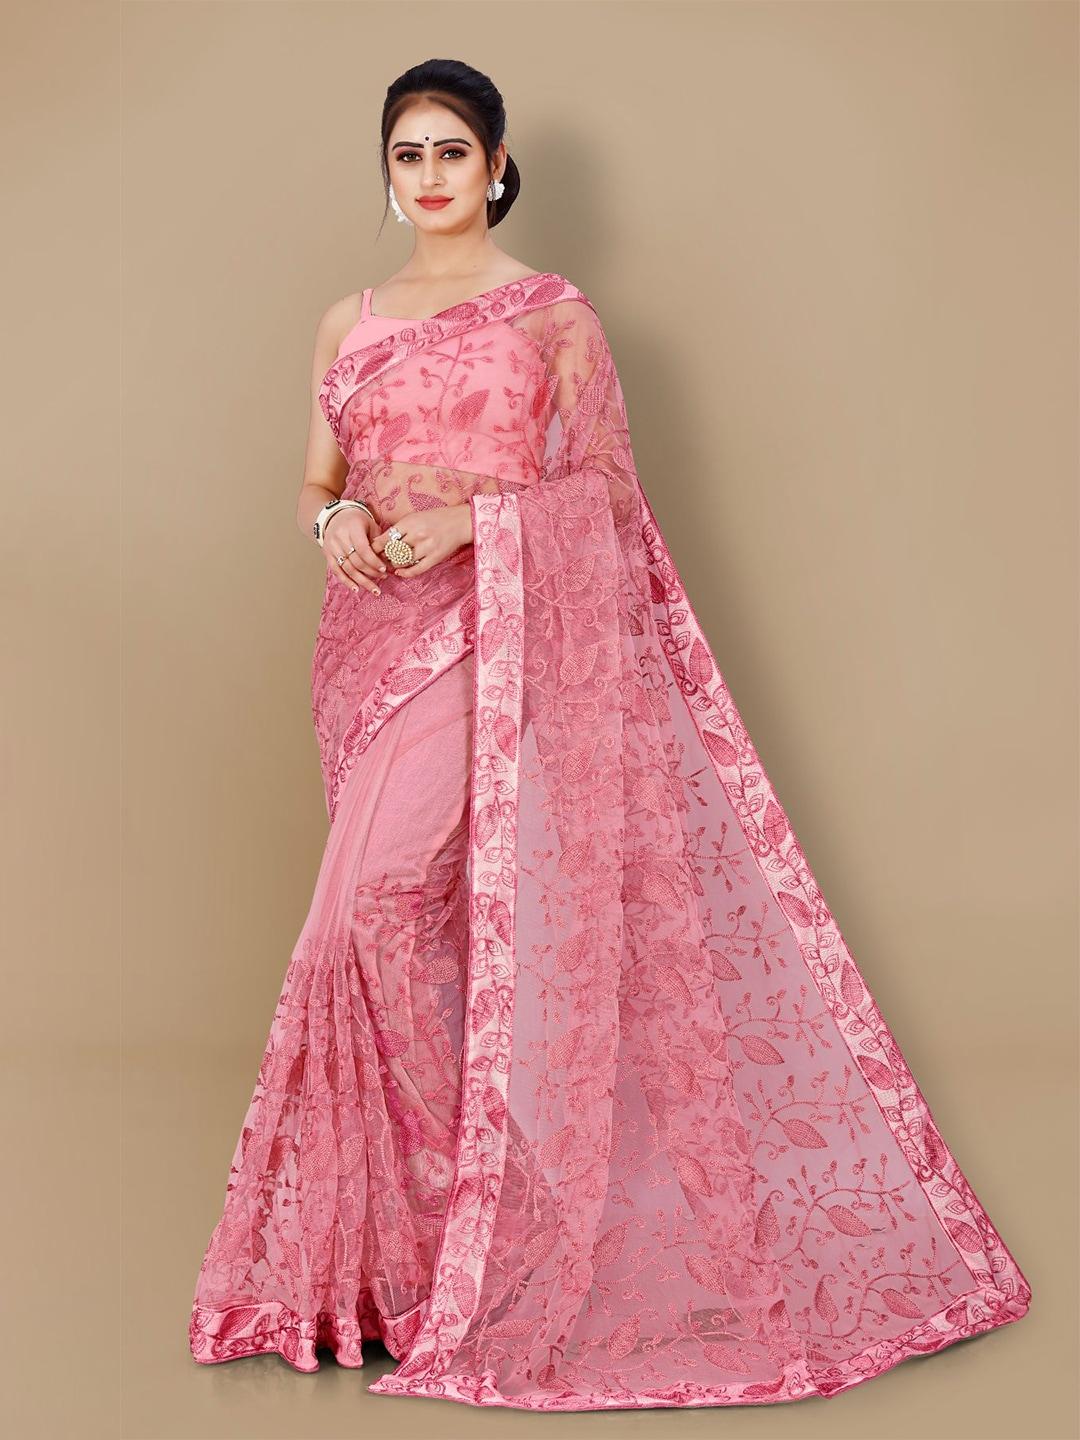 vairagee-floral-embroidered-net-fusion-saree